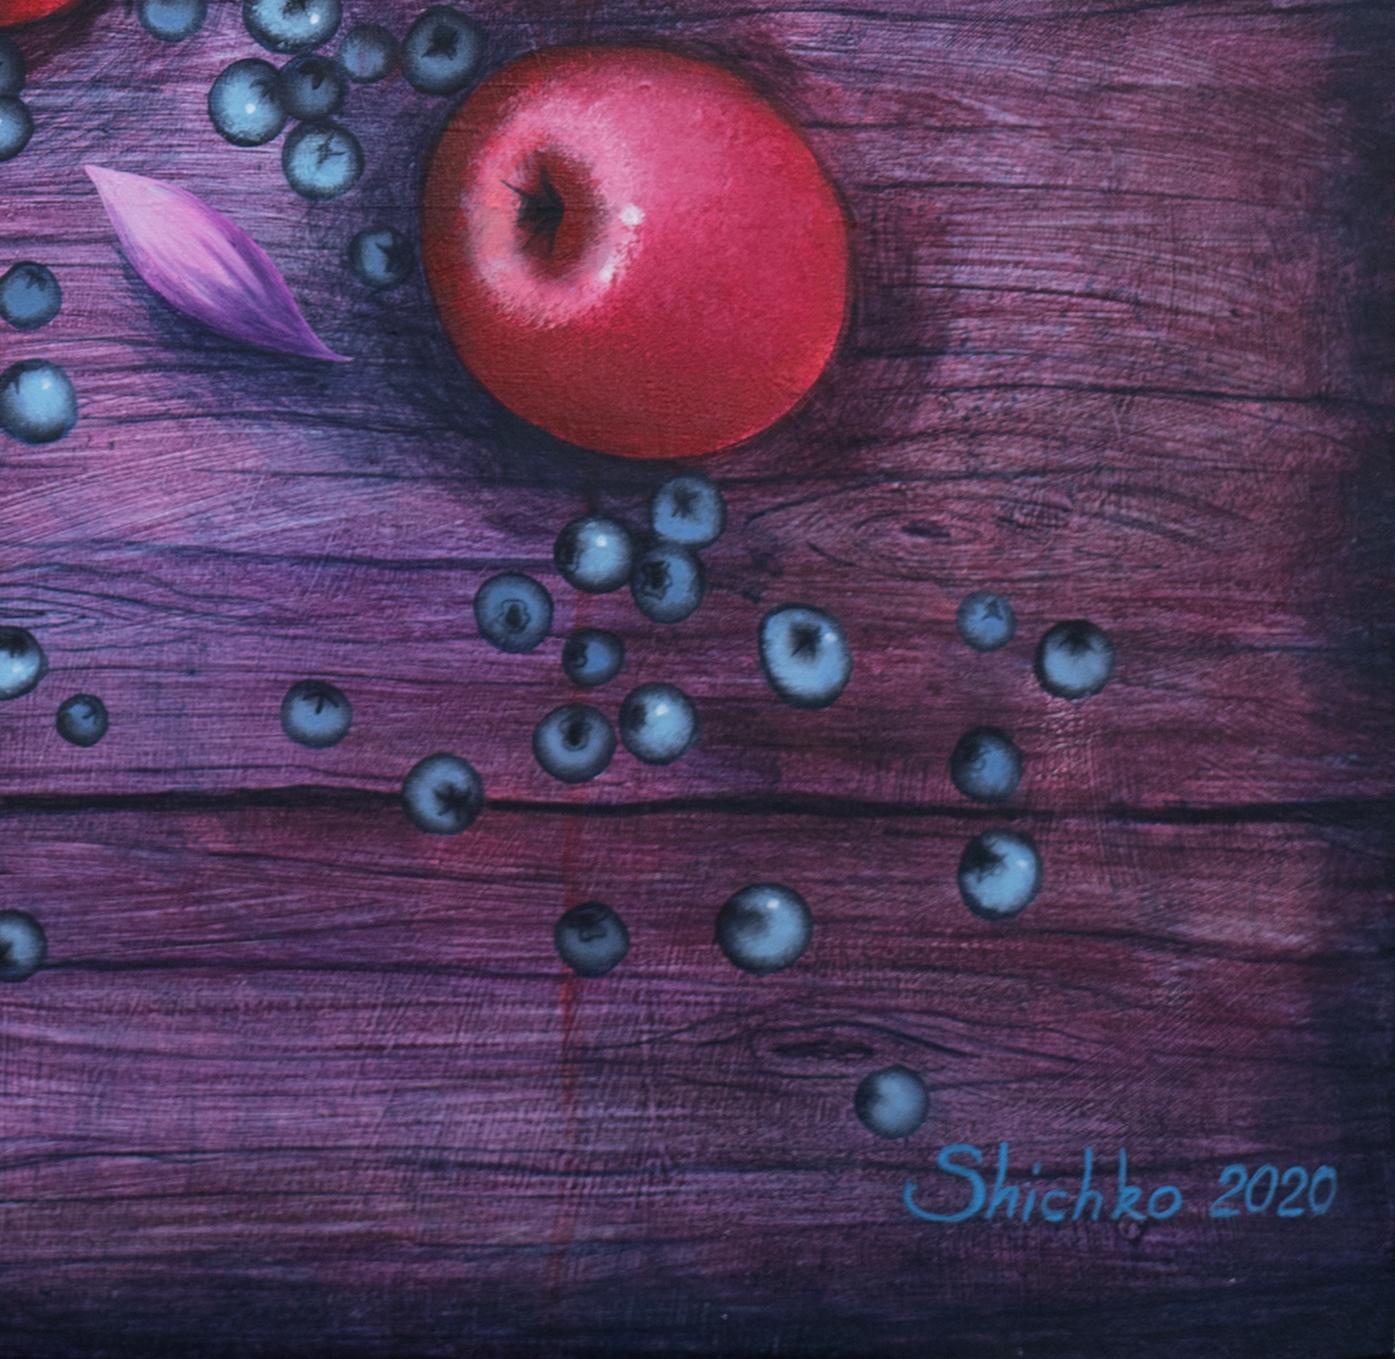 Basket of Apples - Aesthetic Movement Painting by Elena Shichko